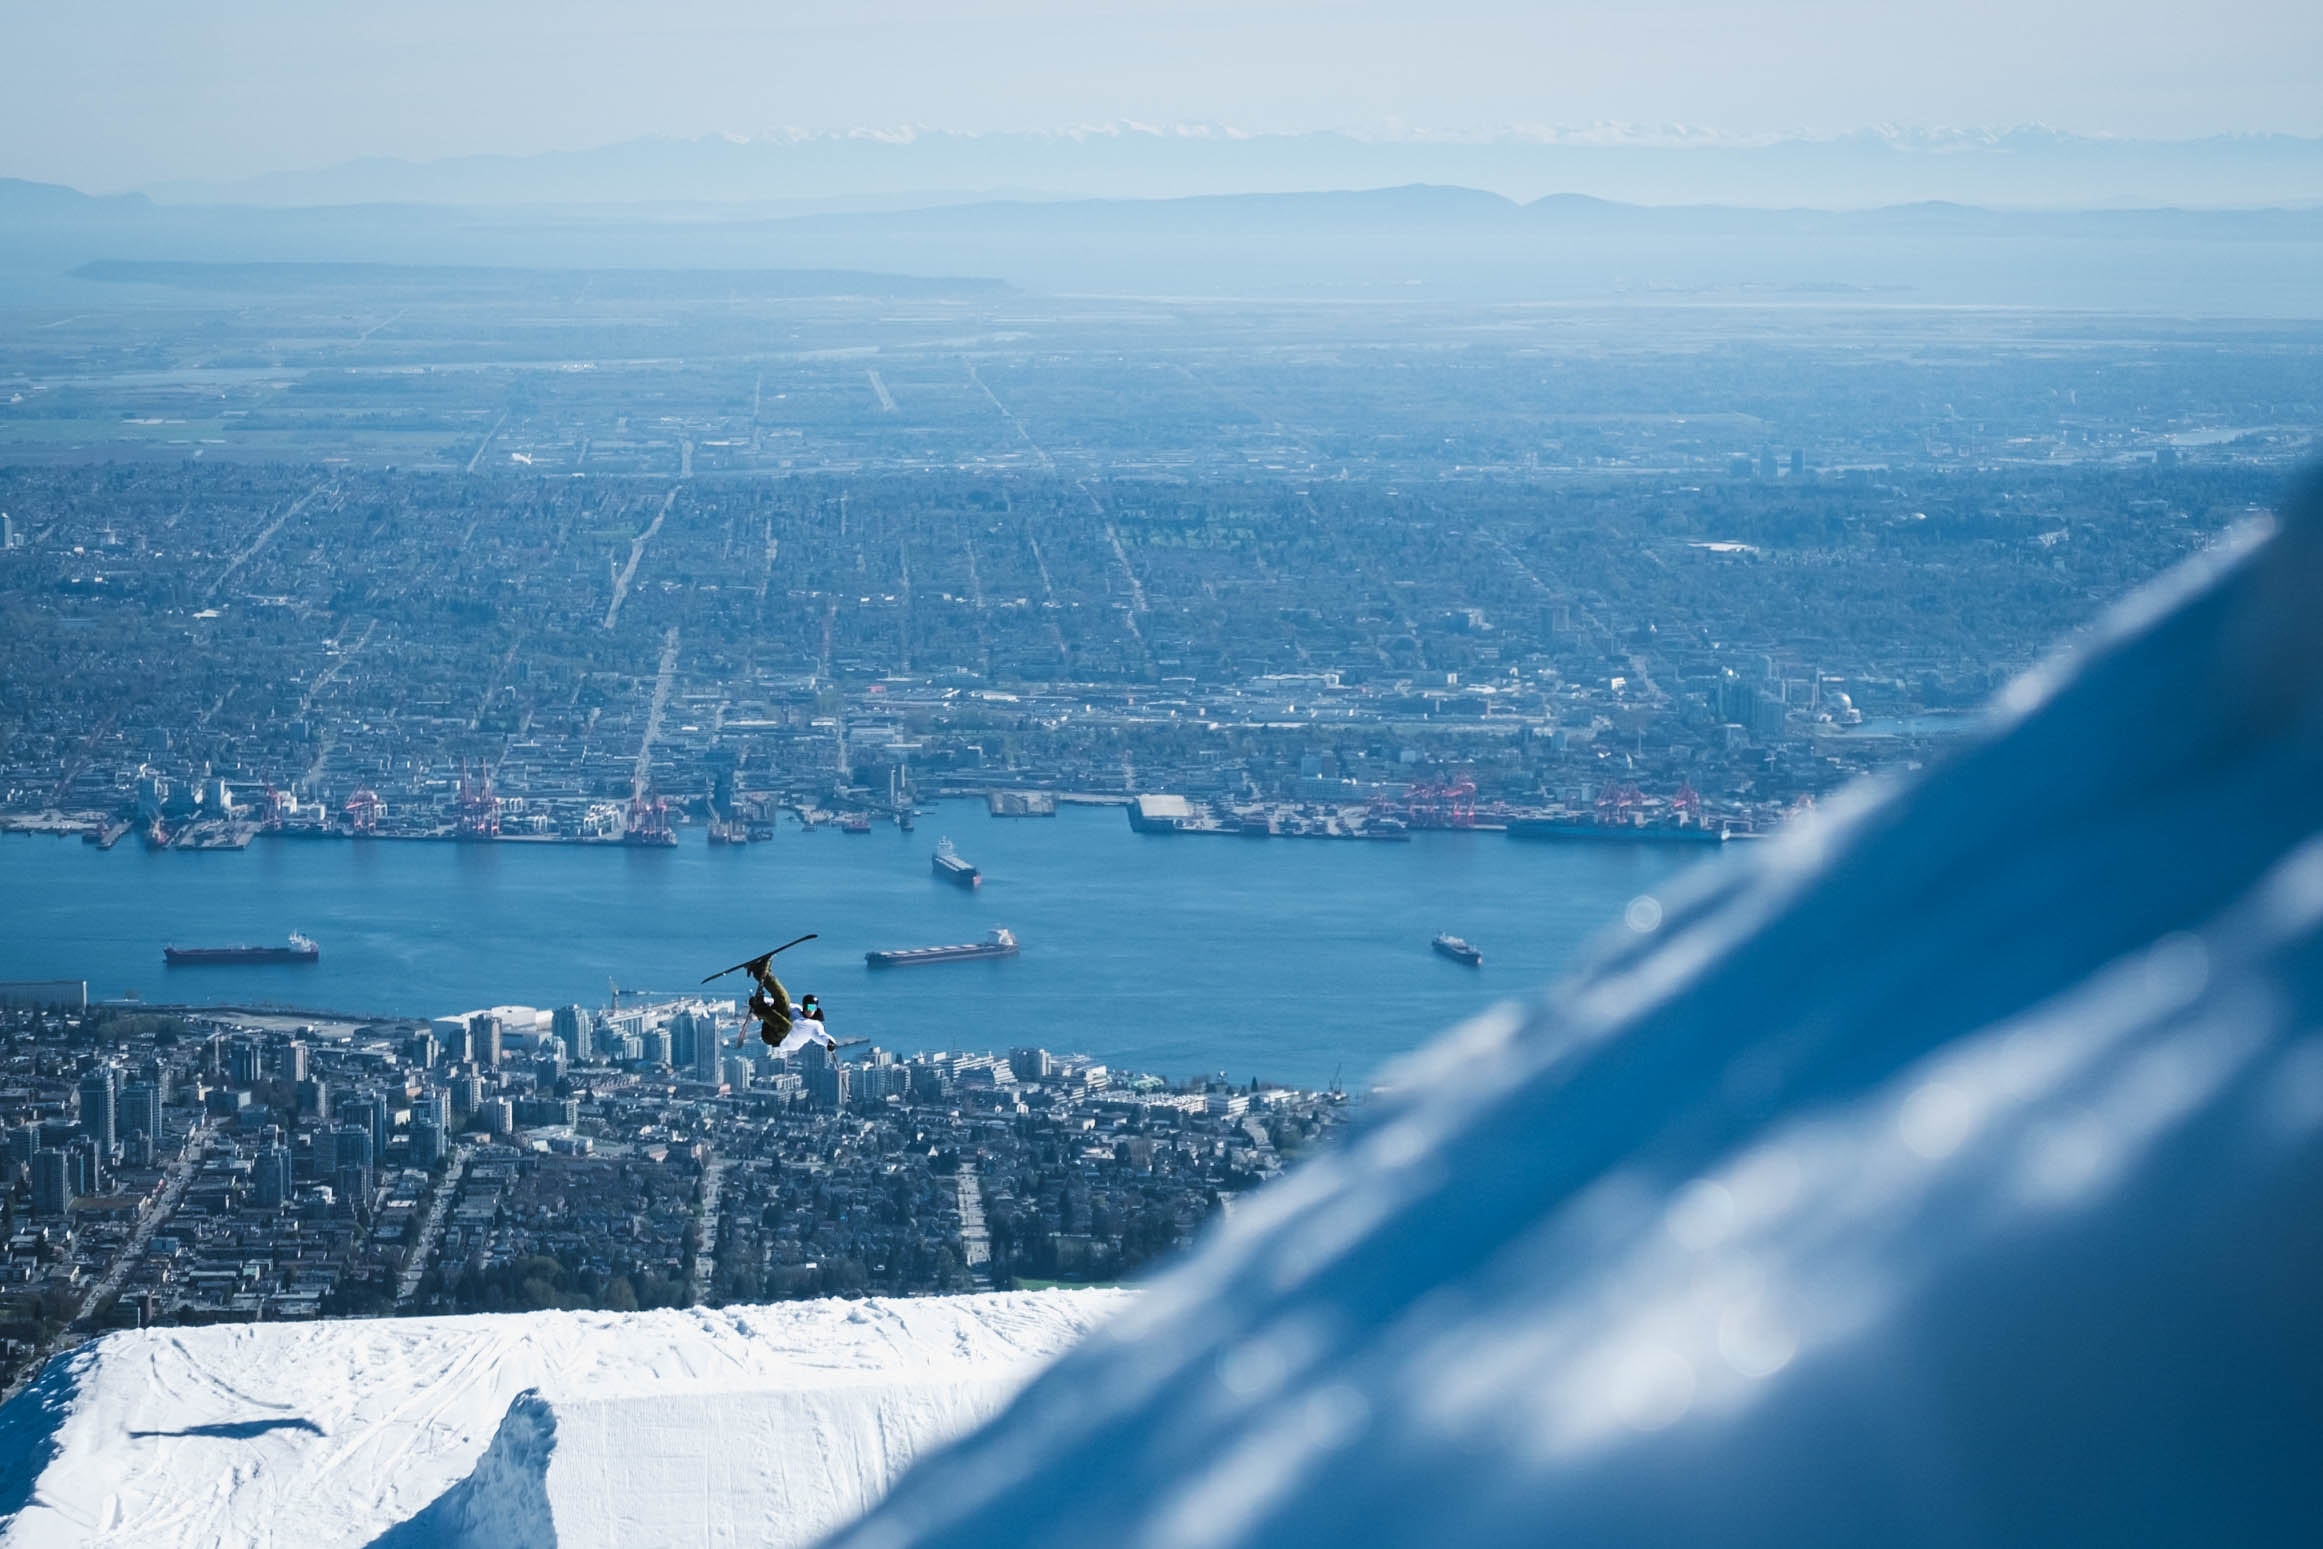 Grouse mountain downtown harbour Vancouver city view snowboarder